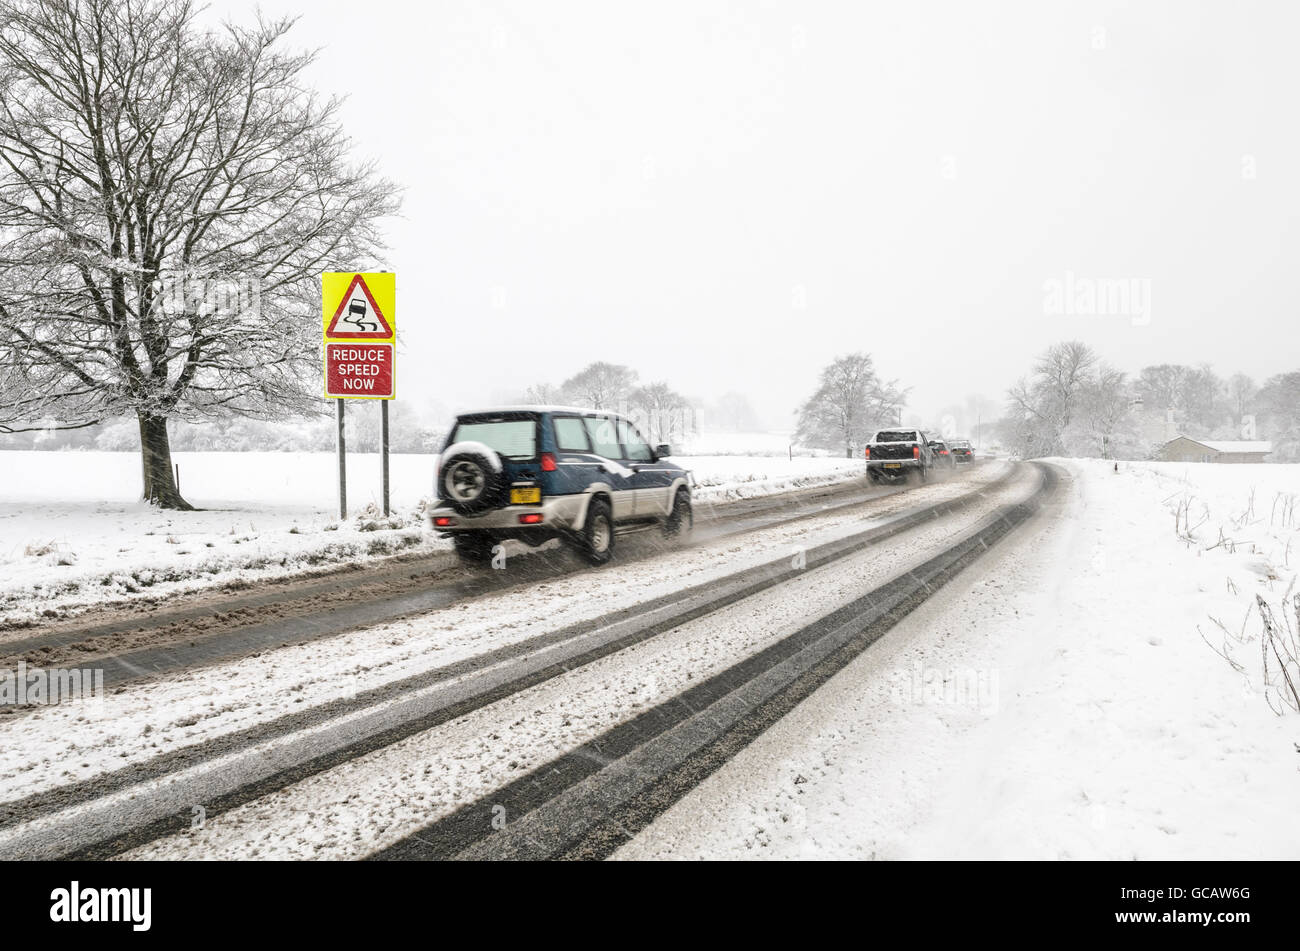 Cars drive past a slippery surface warning road sign while it is snowing with snow on the ground. Stock Photo